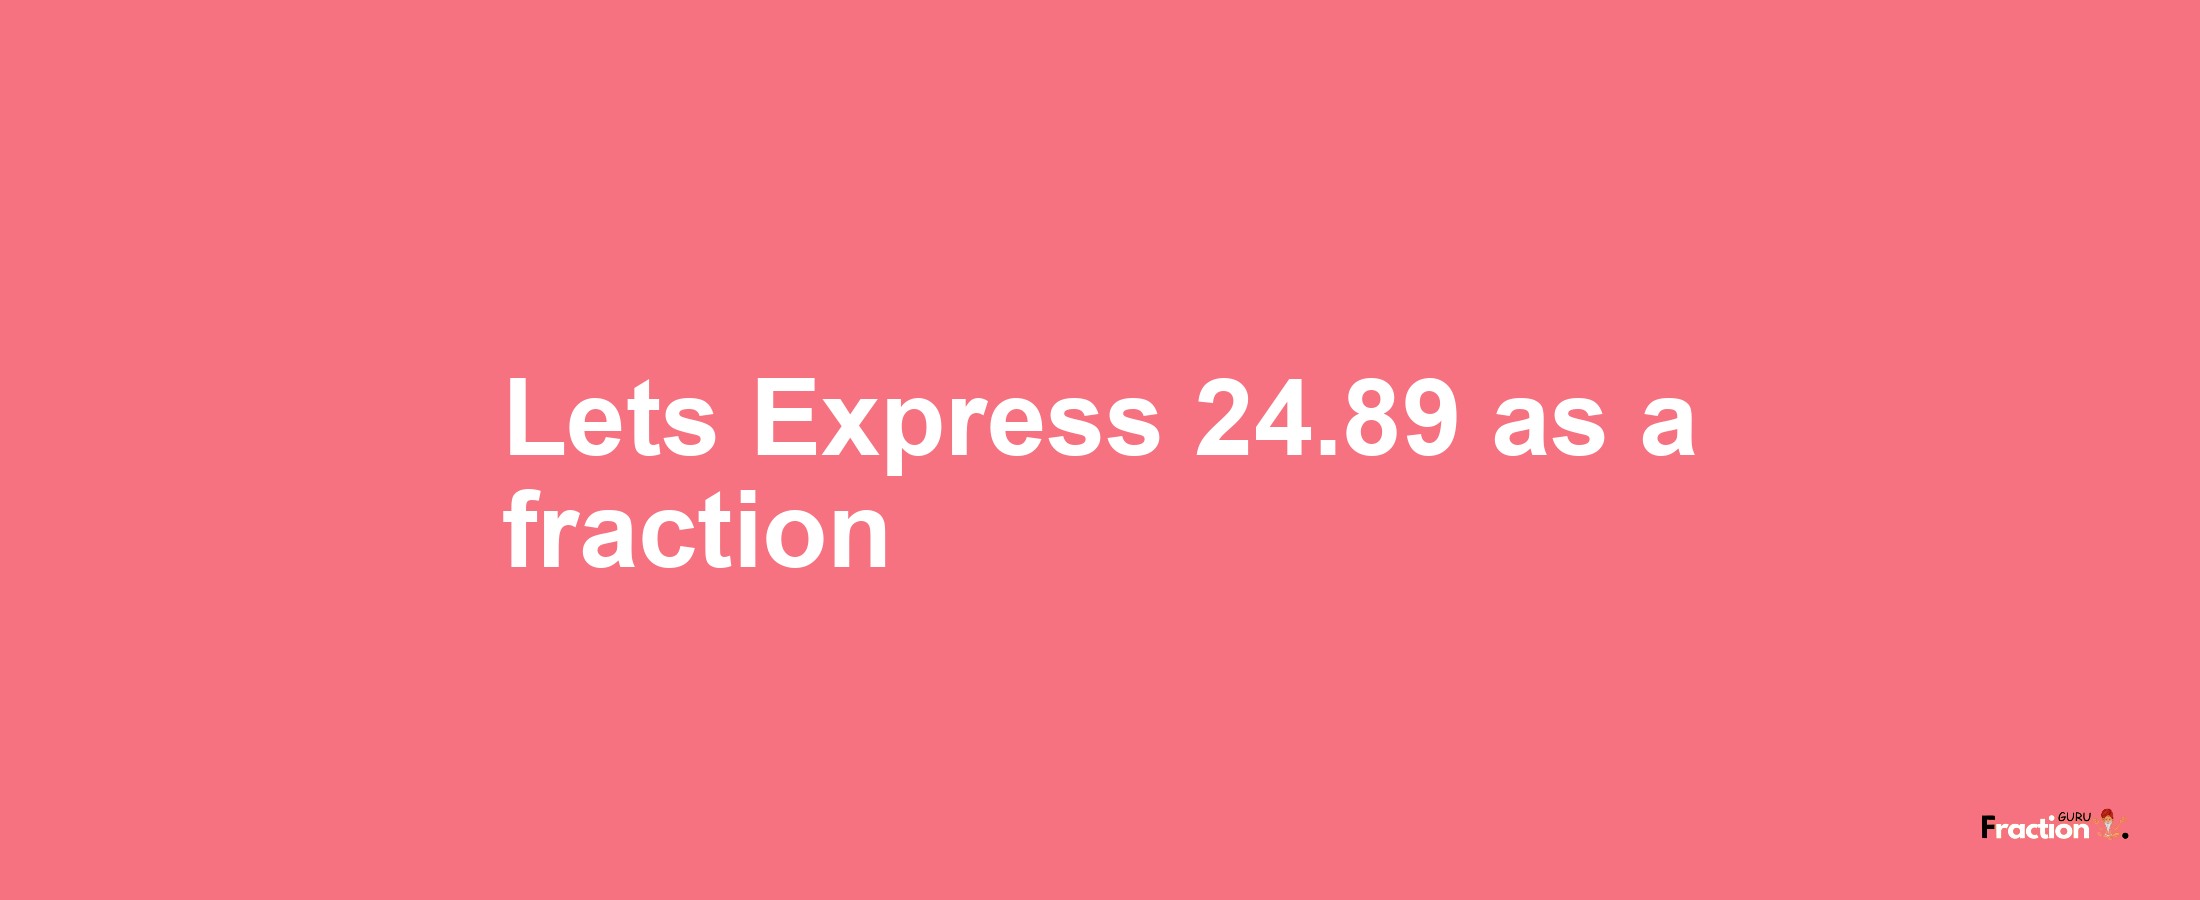 Lets Express 24.89 as afraction